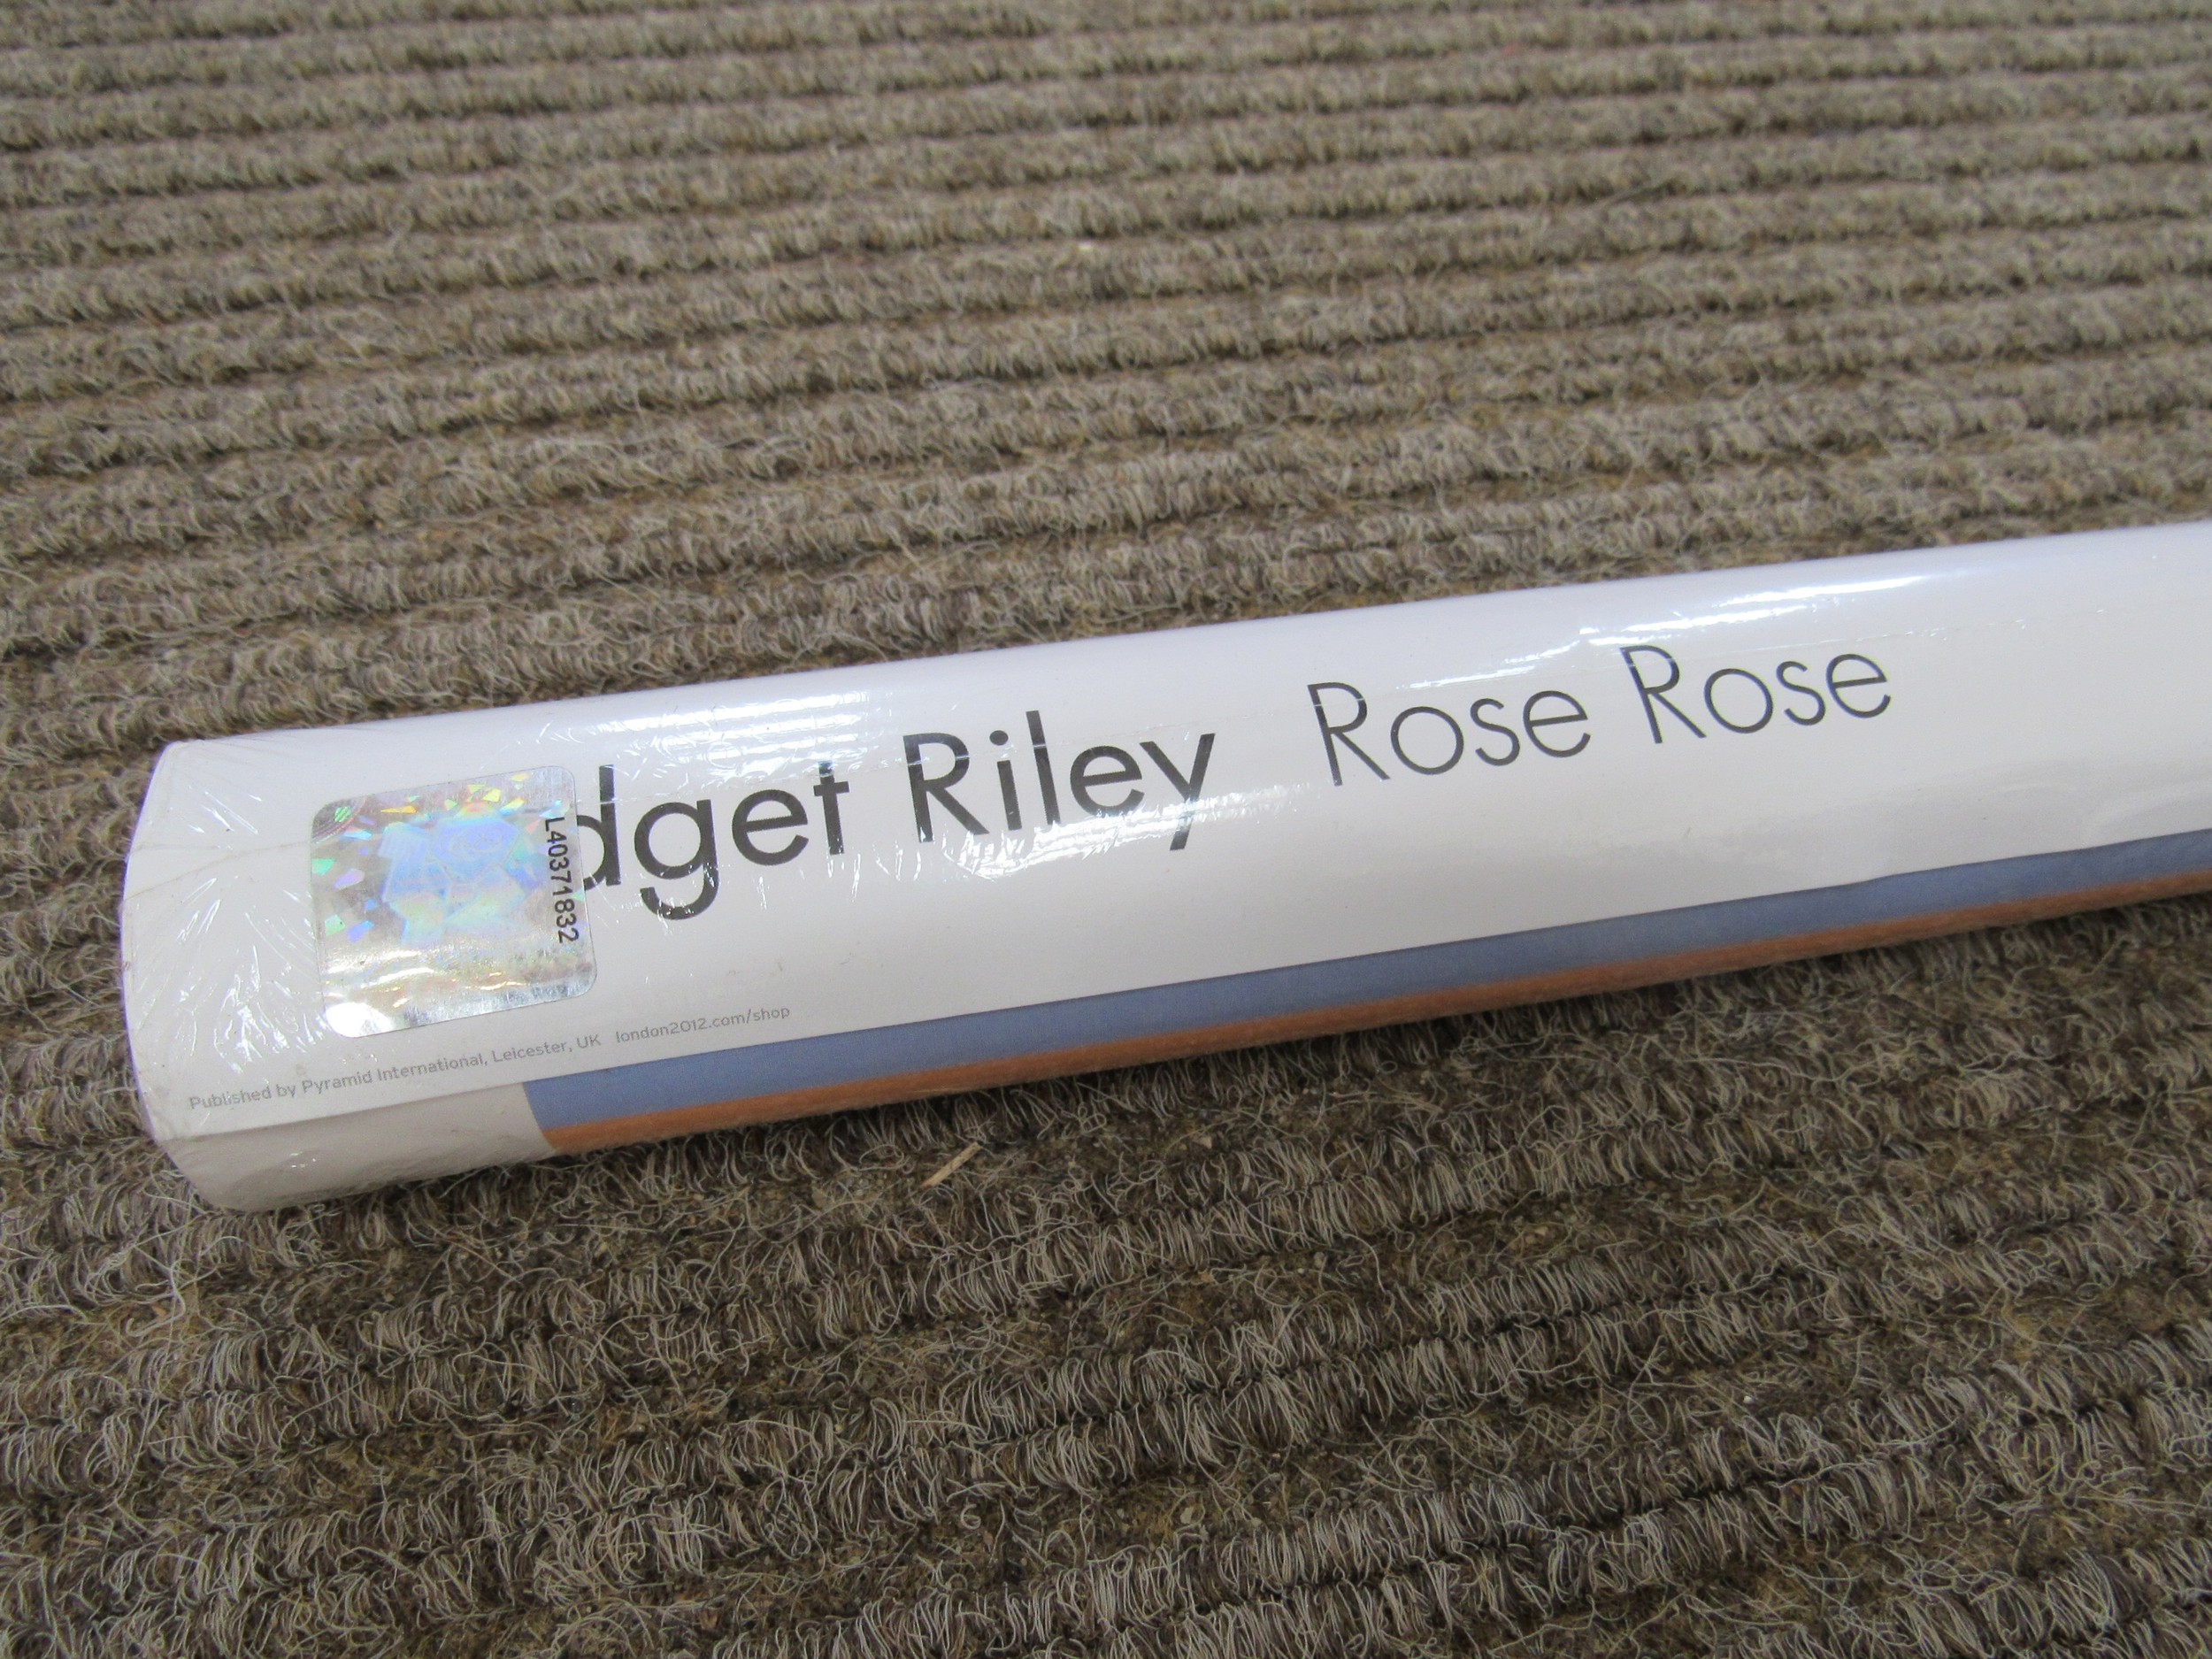 A London 2012 Olympic Poster, Bridget Riley 'Rose Rose' official off set lithograph, still sealed in - Image 2 of 4